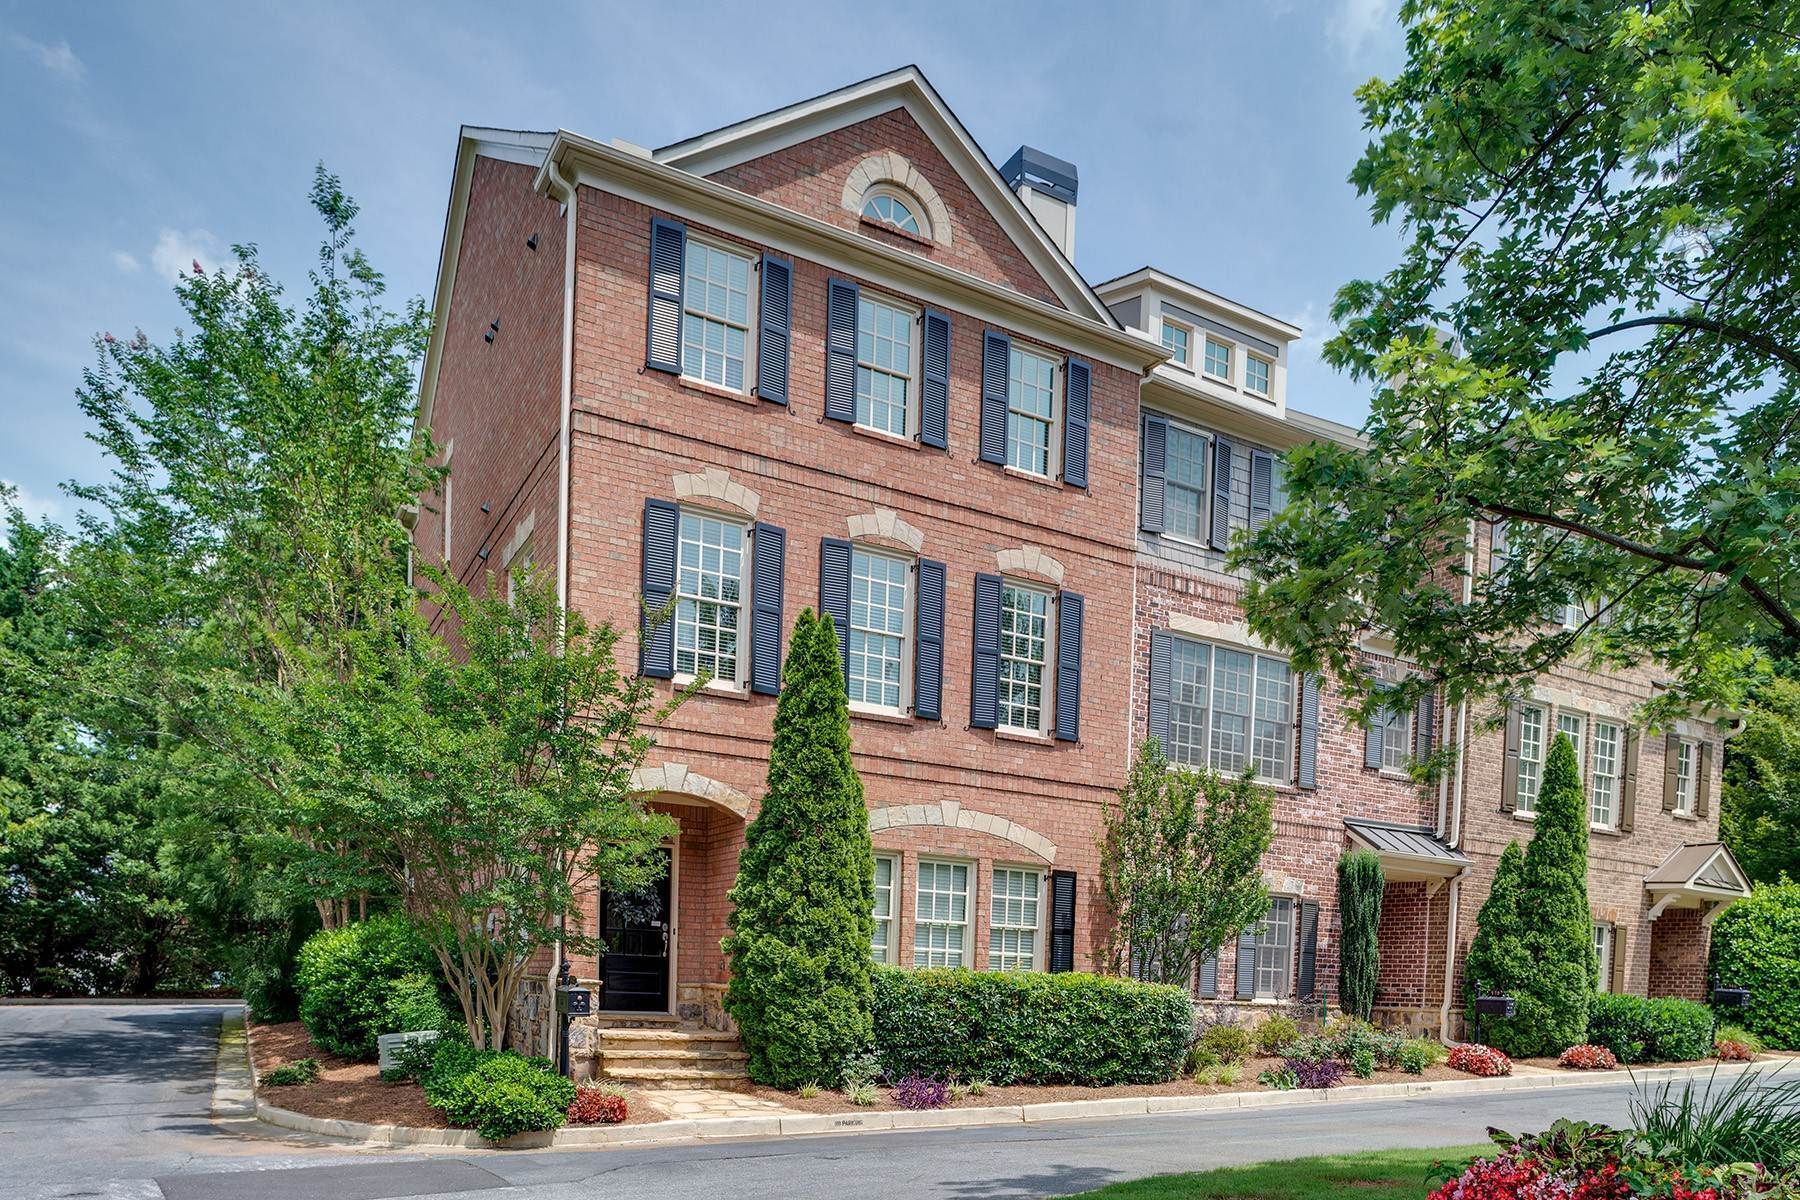 Townhouse for Sale at Brick End Unit Townhome Moments from Marietta Square 572 Parkside Village Way NW Marietta, Georgia 30060 United States